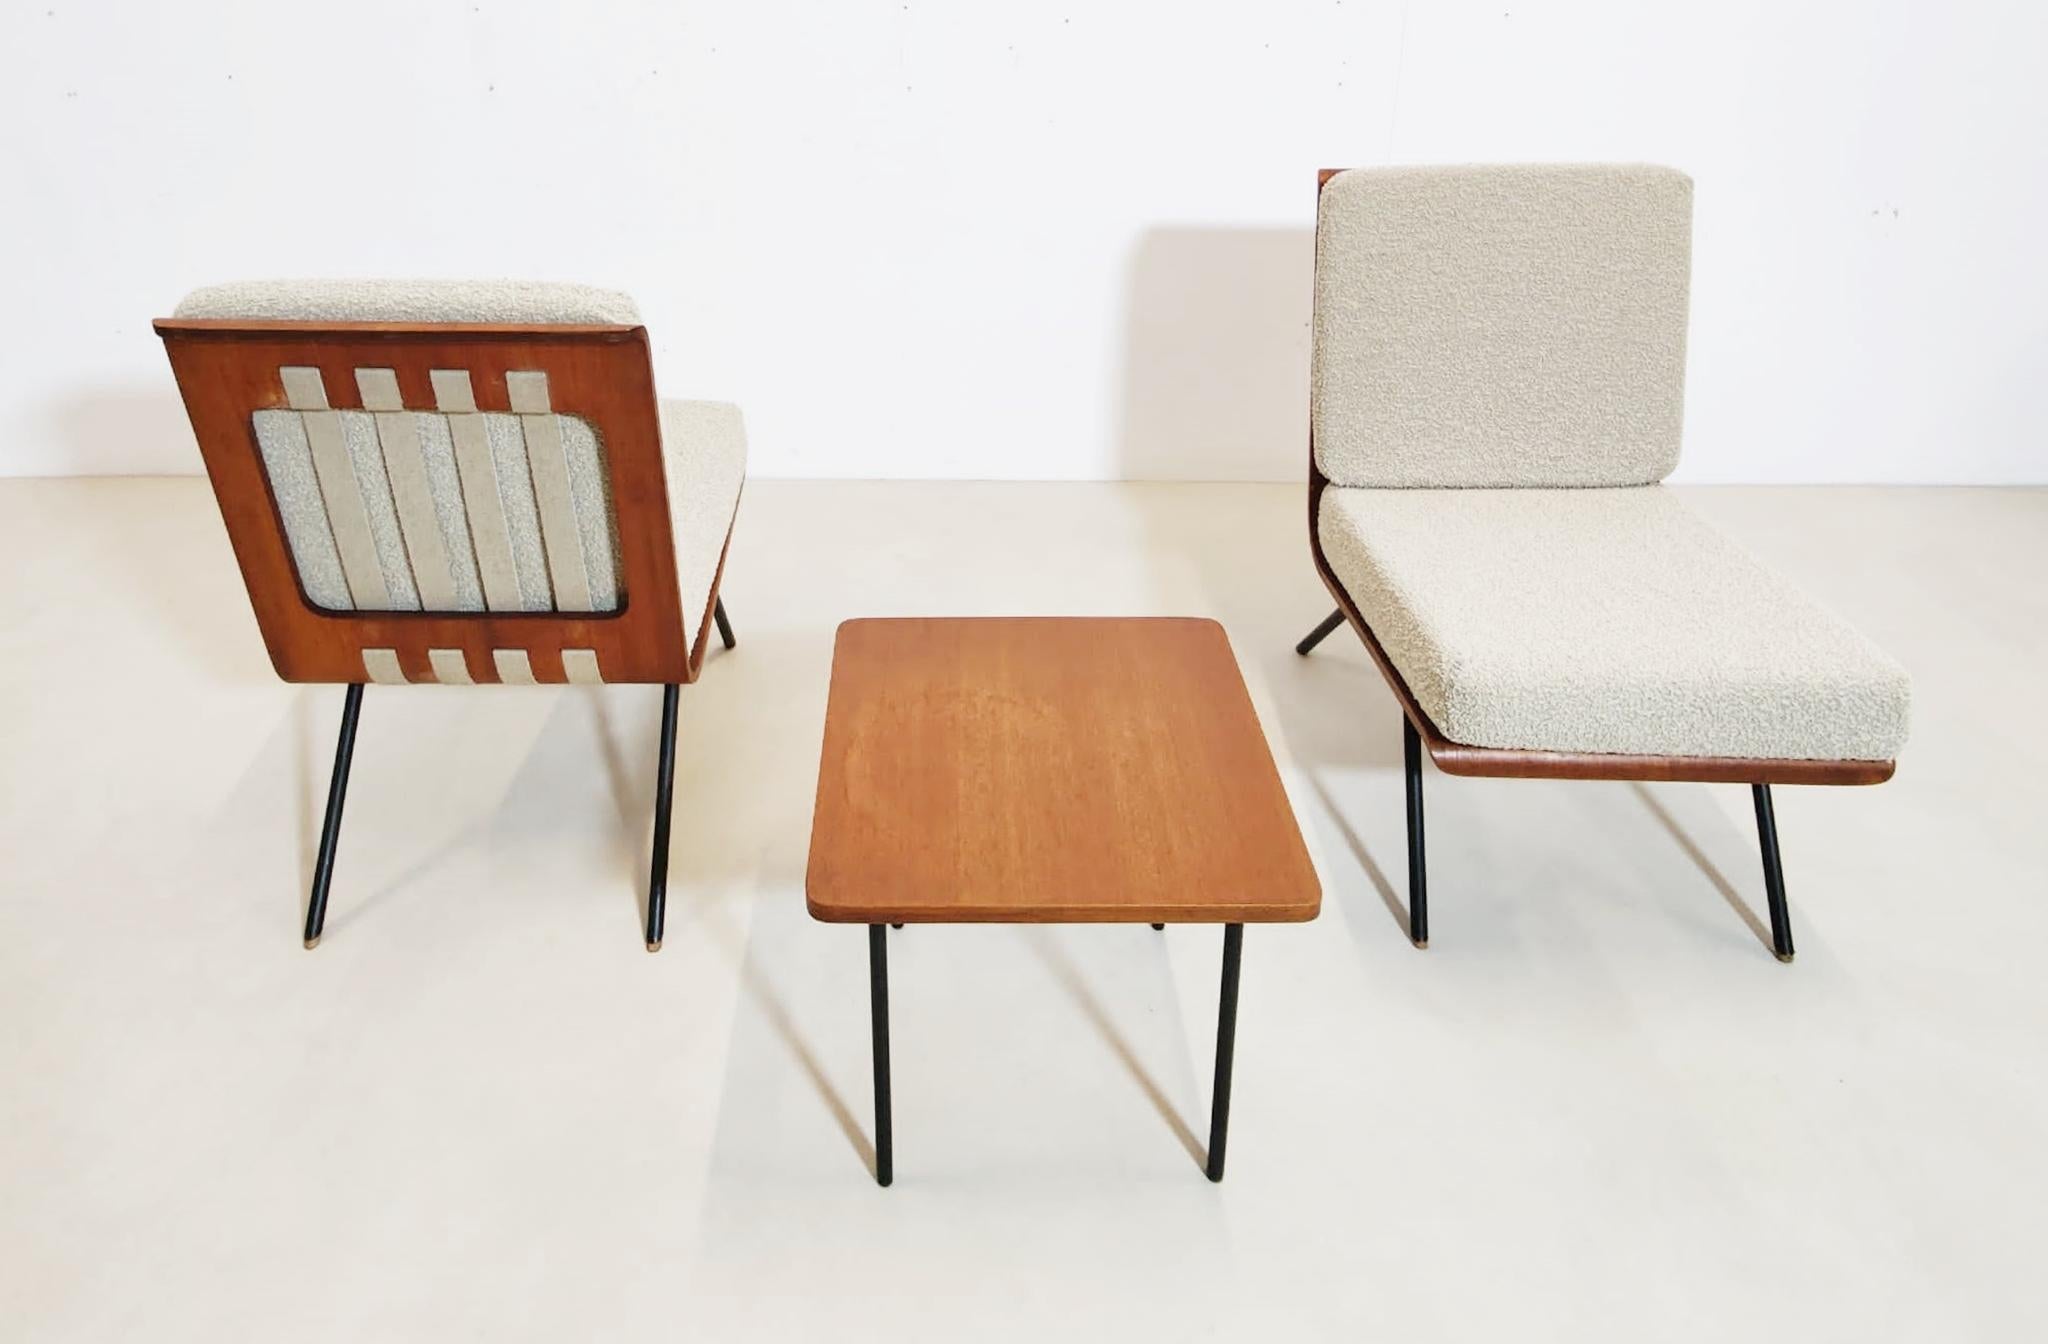 Mid-20th Century Set of 5 Lounge Chairs and Coffee Table by Franco Campo & Carlo Graffi, Italy For Sale